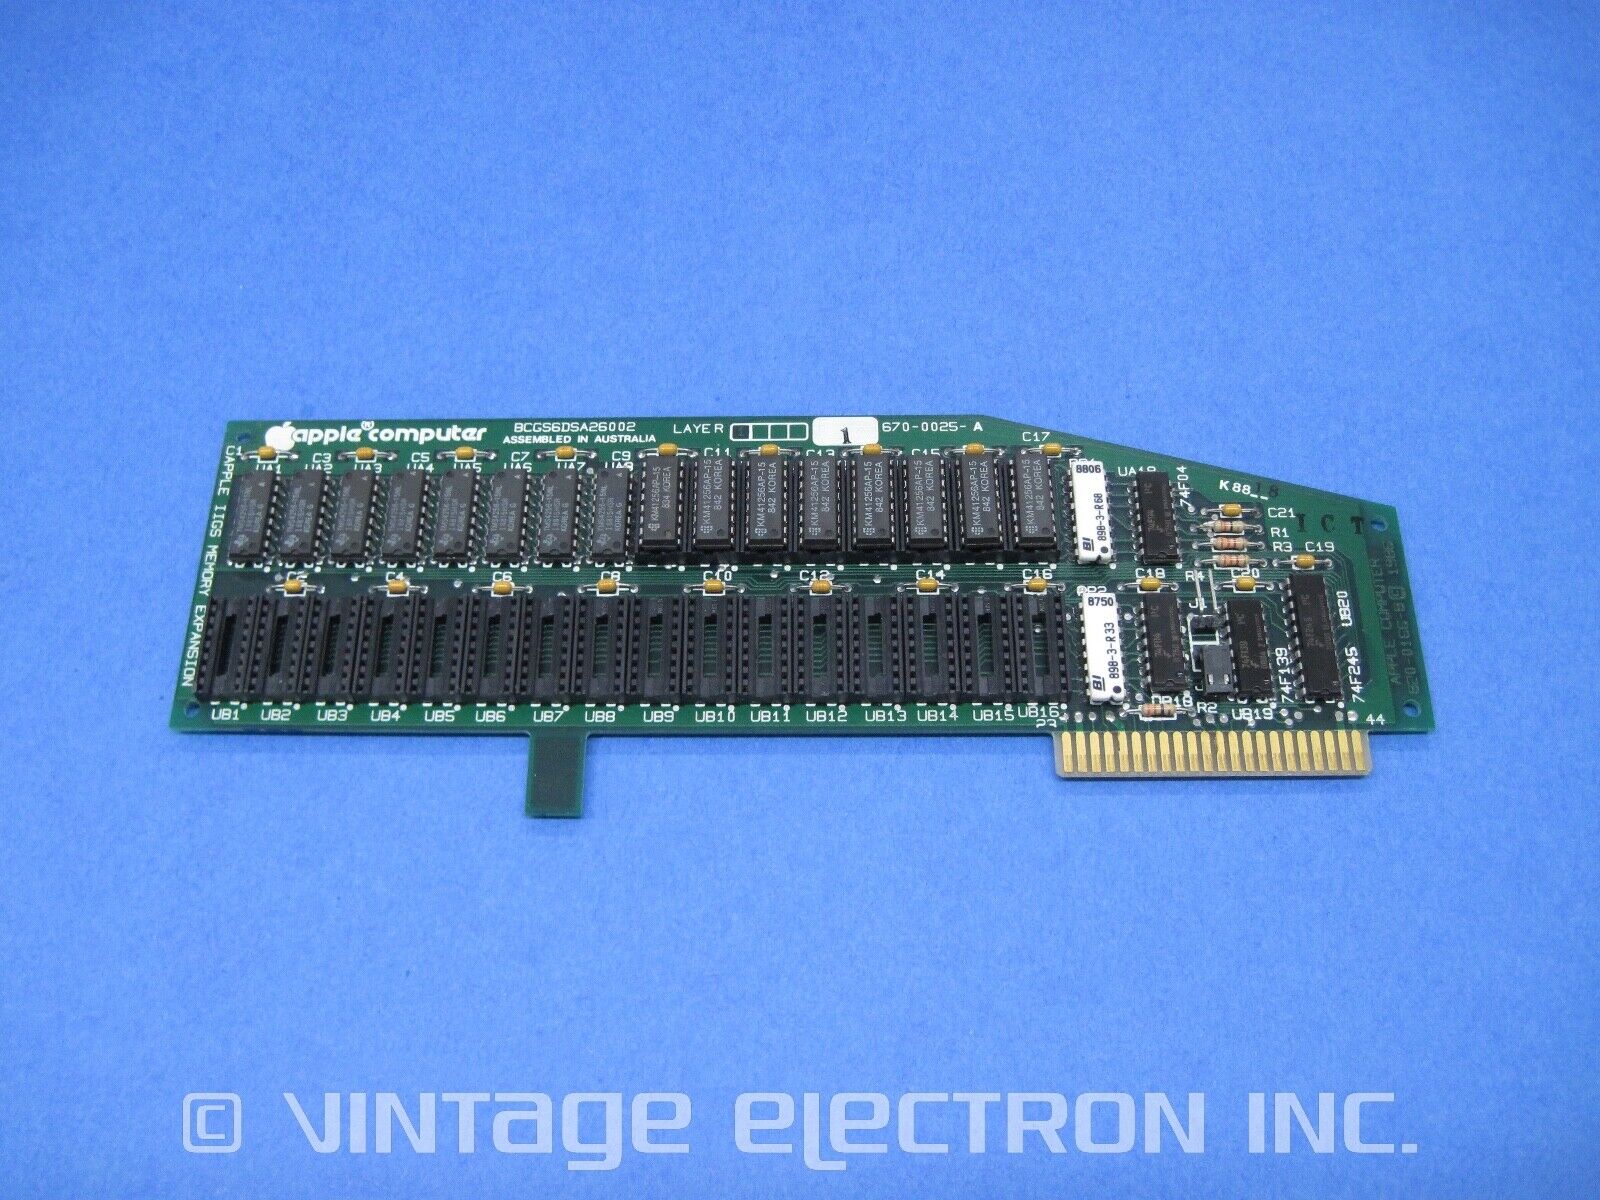 Apple IIGS Memory Expansion Card - 512K (512KB) - Fully Tested (670-0025-A)